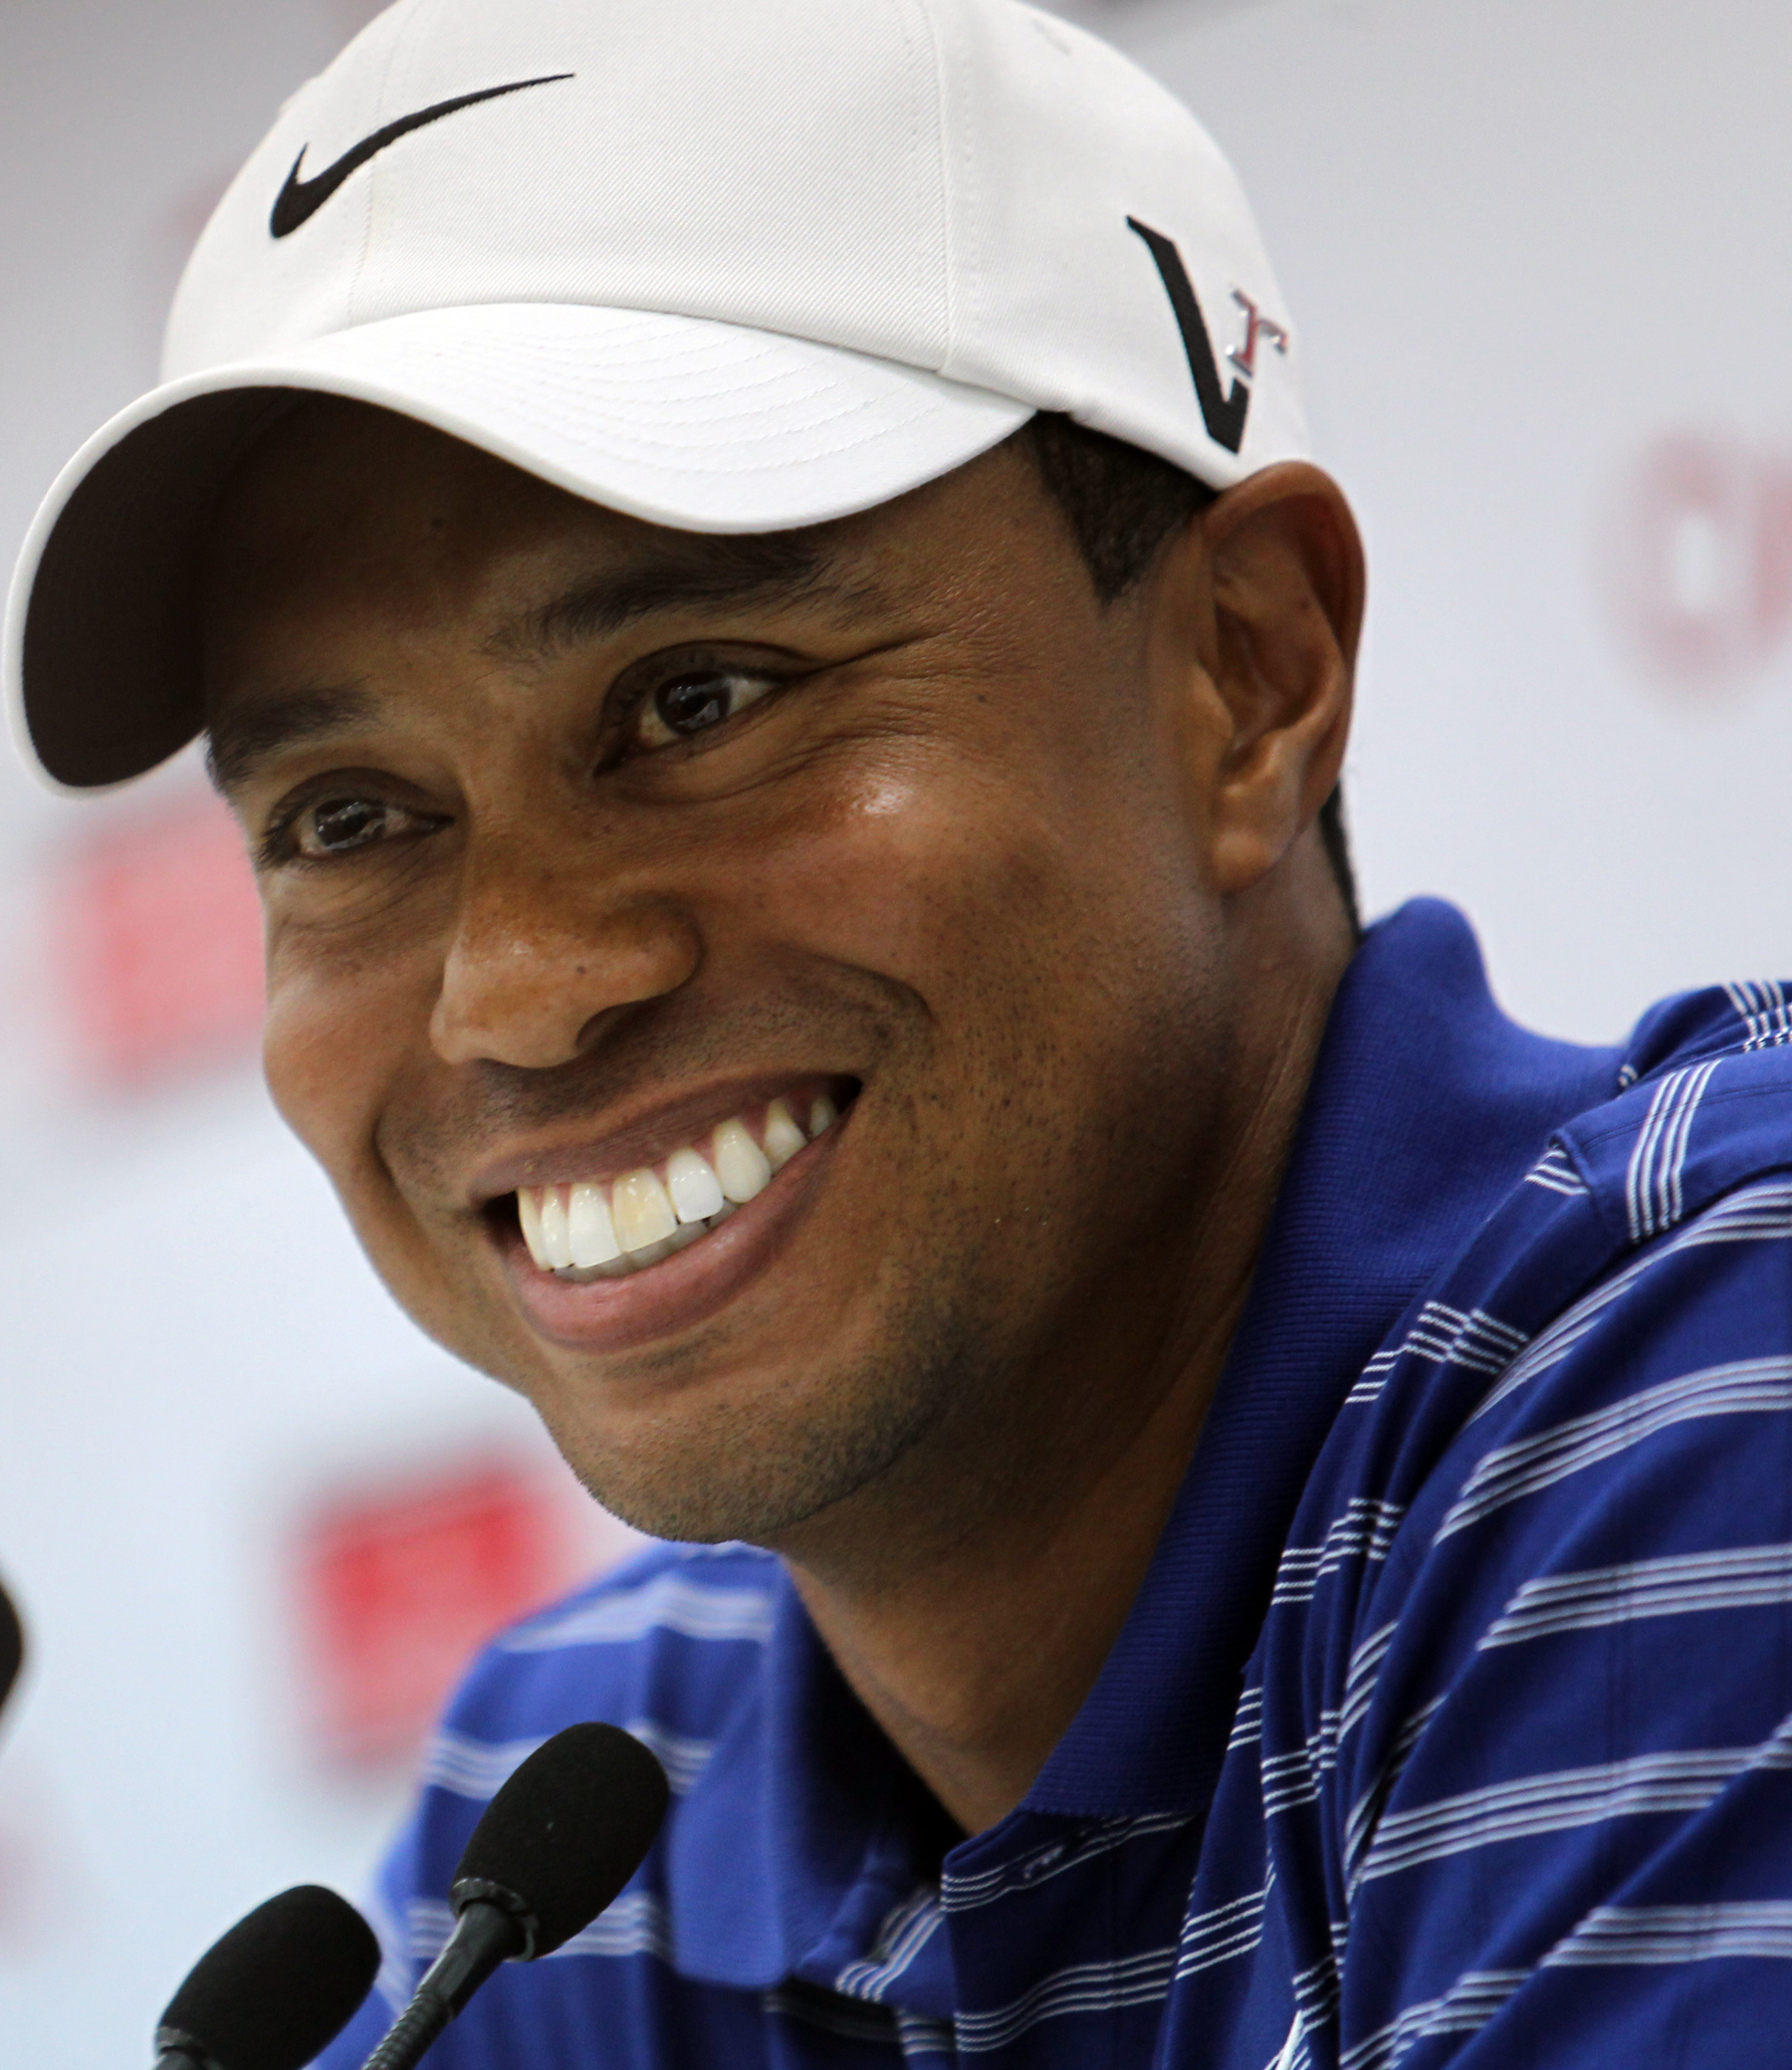 PHOTO: Tiger Woods smiles during a press conference prior to the start of the Dubai Desert Classic 2011 at the Emirates Golf Club on Feb. 9, 2011 in Dubai.